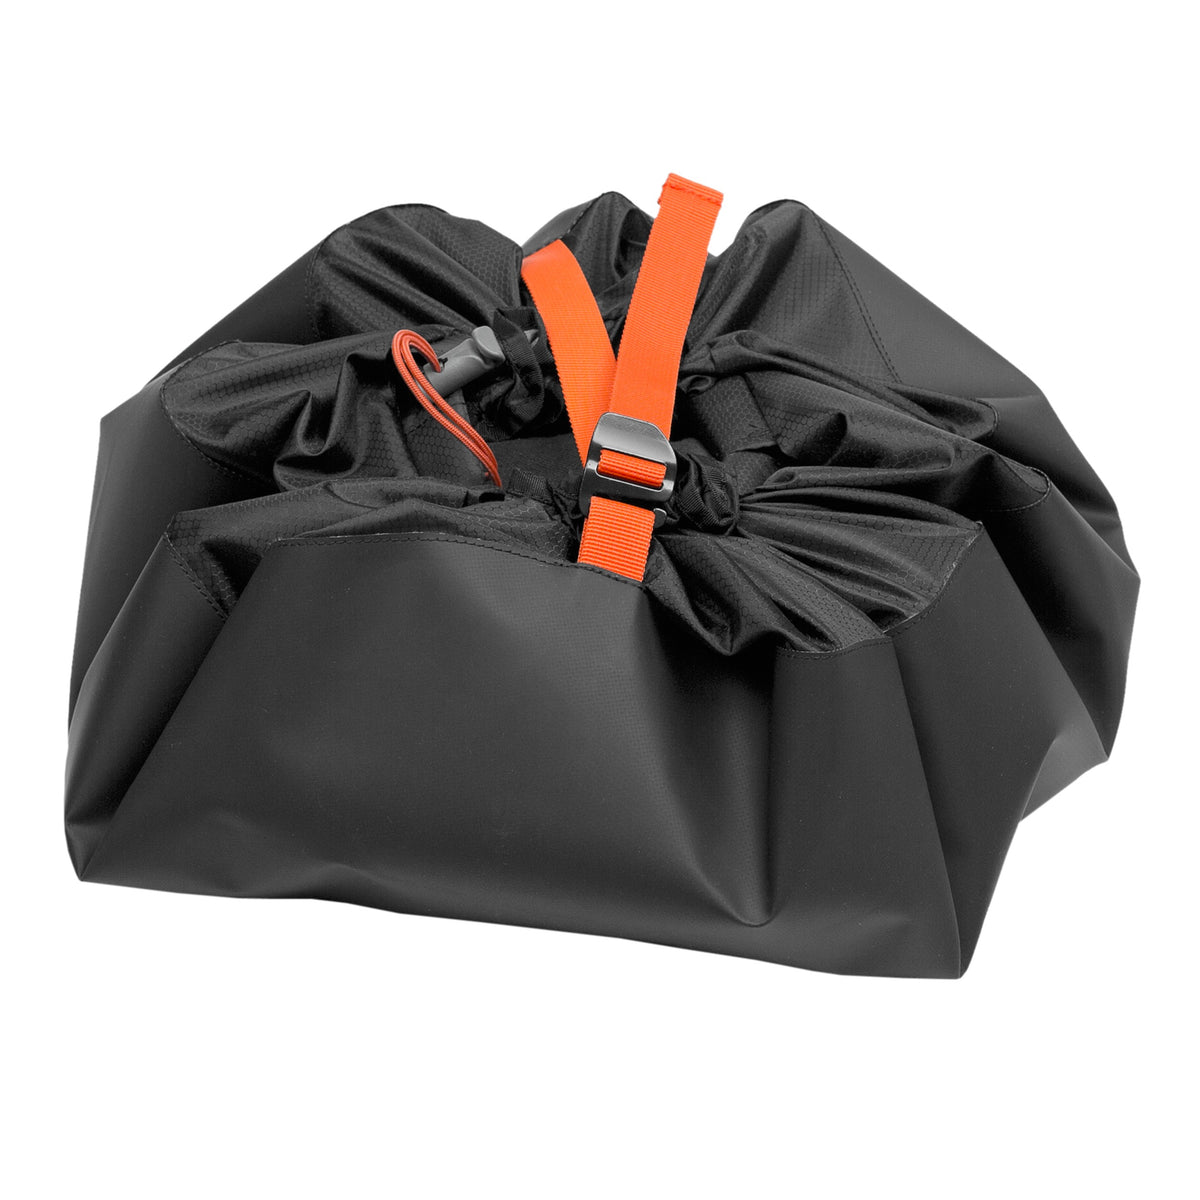 Wetsuit bag ION CHANGING MAT/WETBAG BLACK